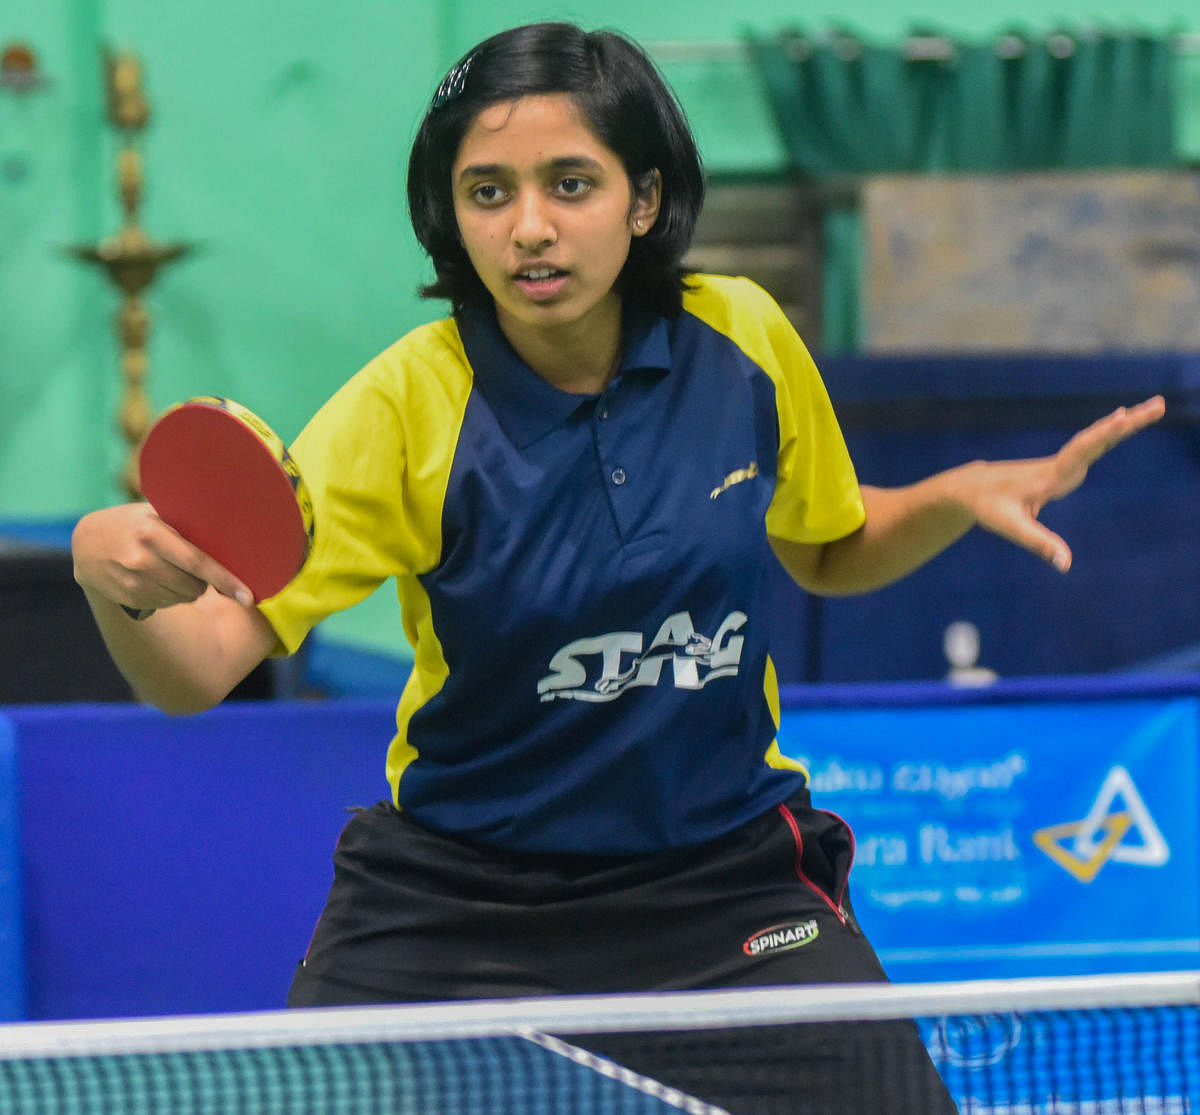 Yashaswini Ghorpade, the top-ranked Indian in the U-15 section, trains at the Skies International TT Academy which is facing issues to reopen. DH file PHOTO/SK DINESH